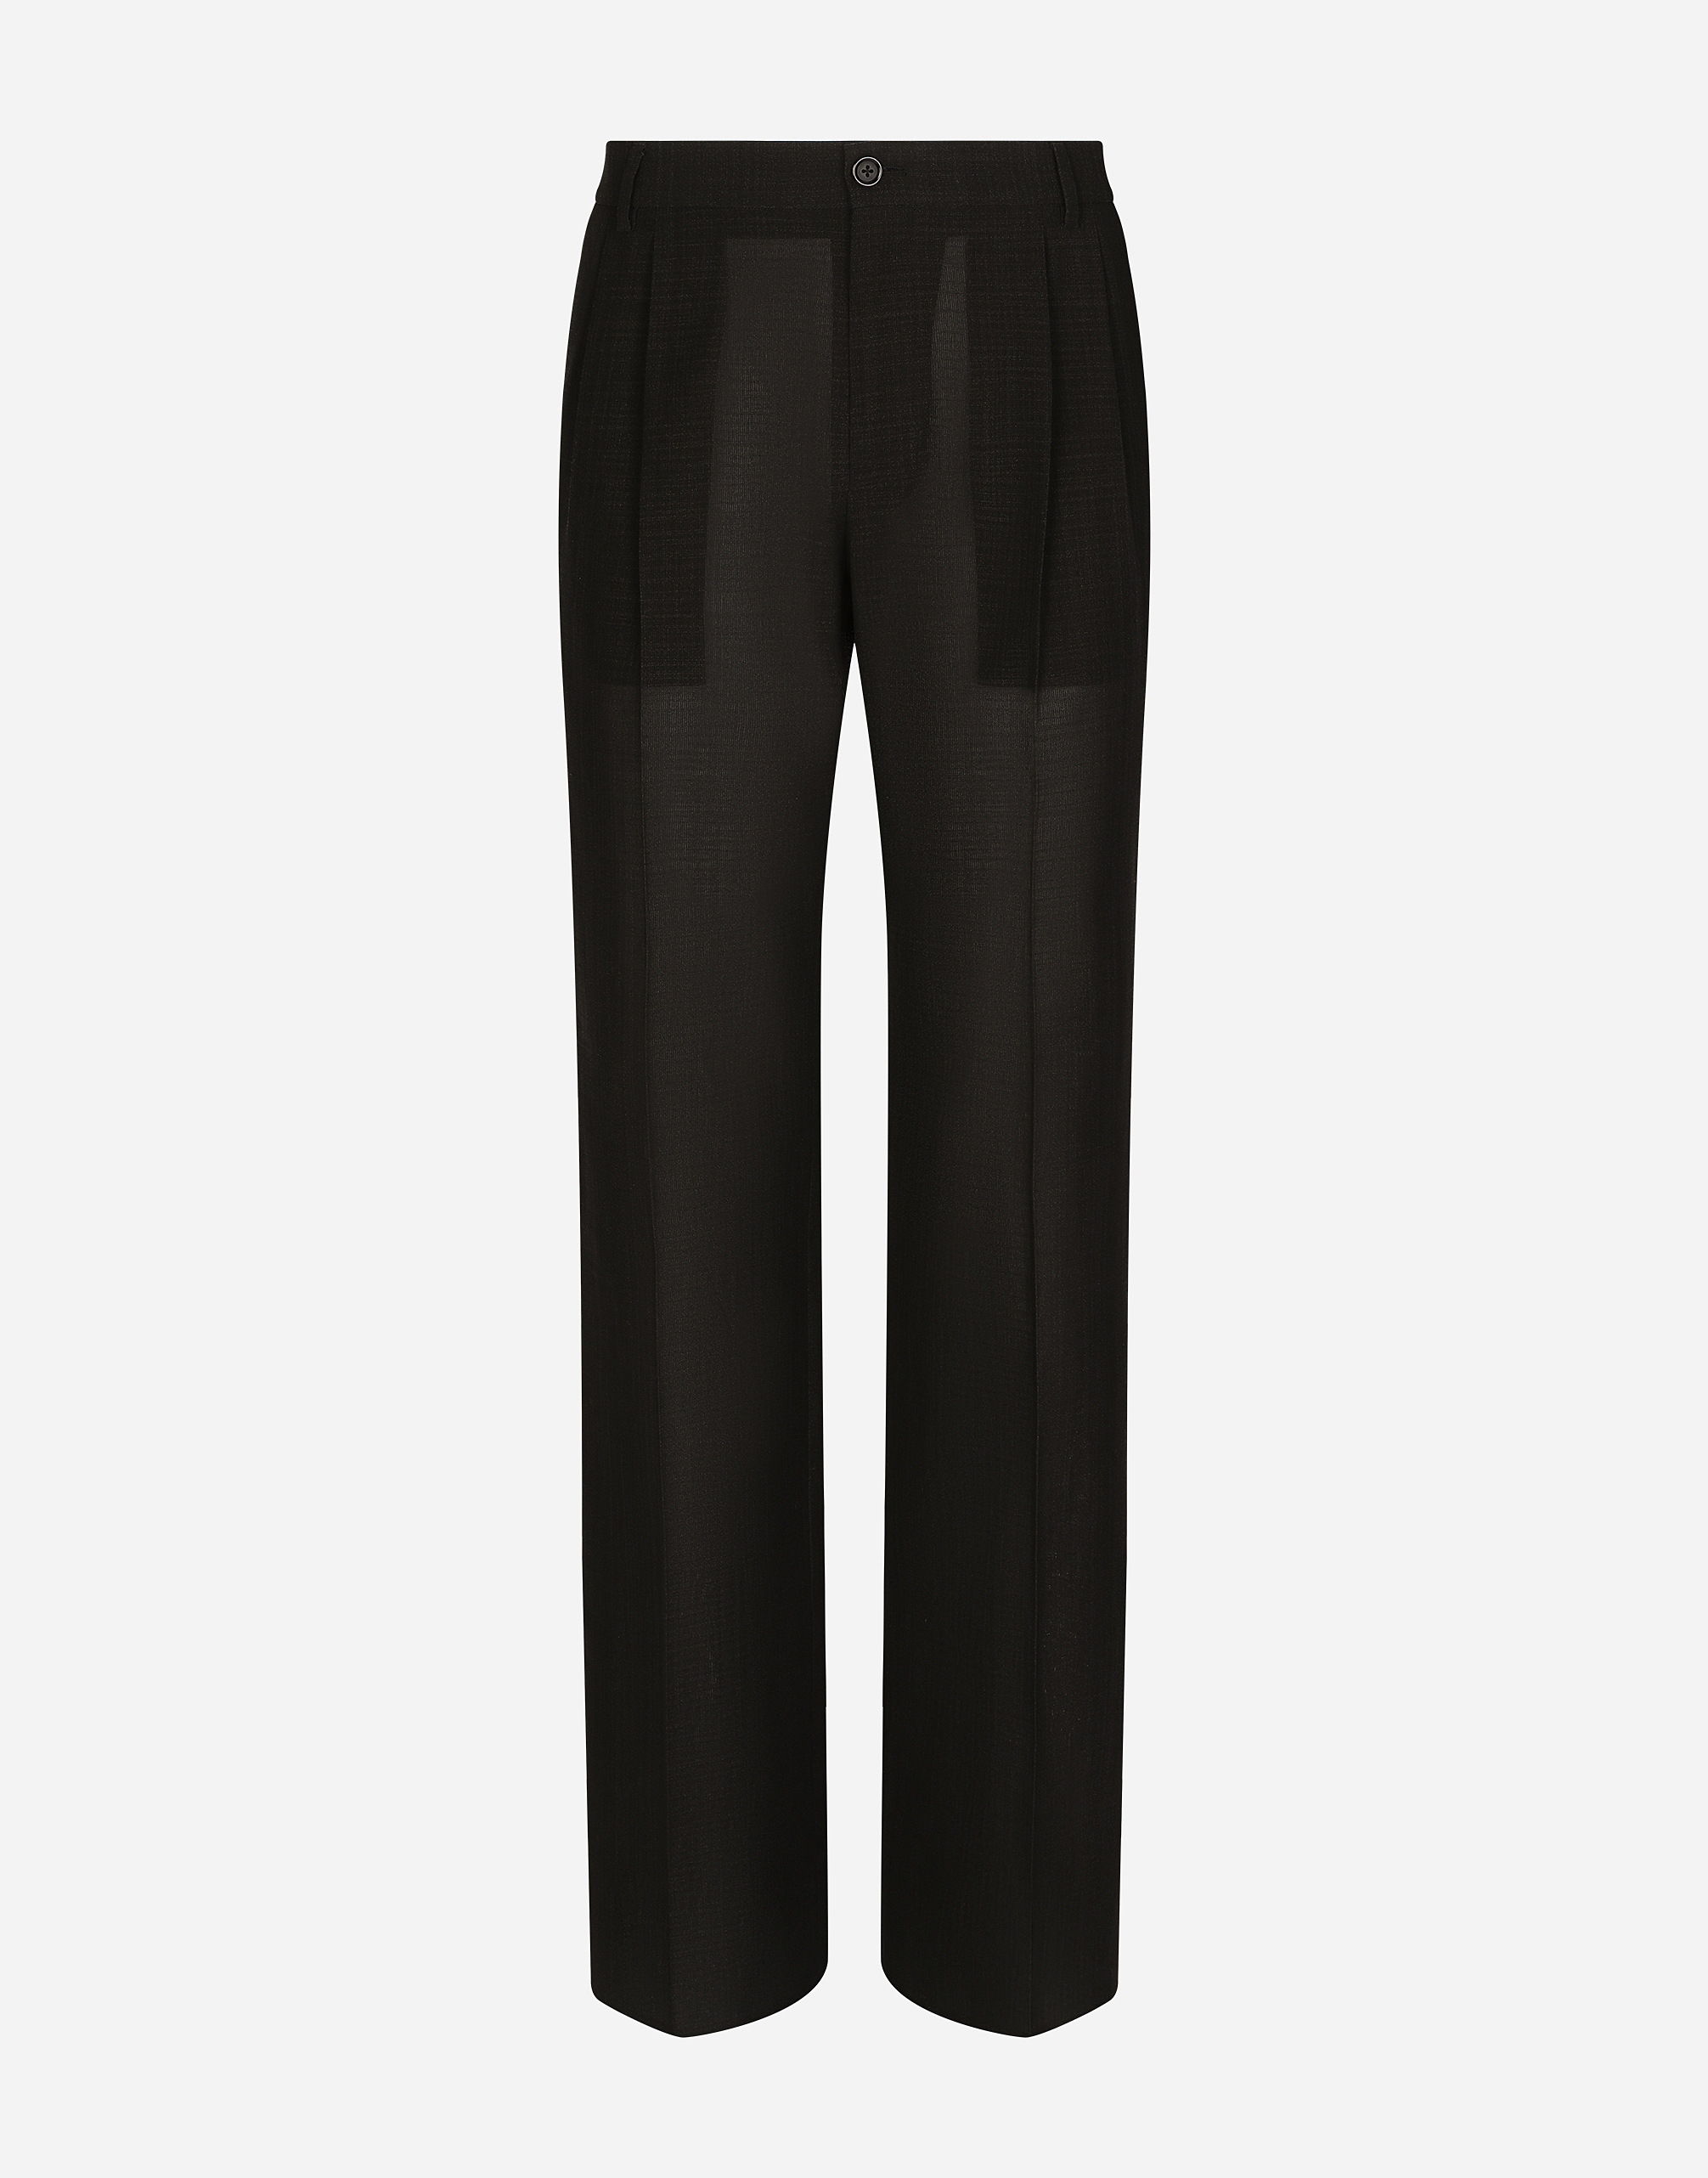 Tailored straight-leg pants in technical cotton in Grey